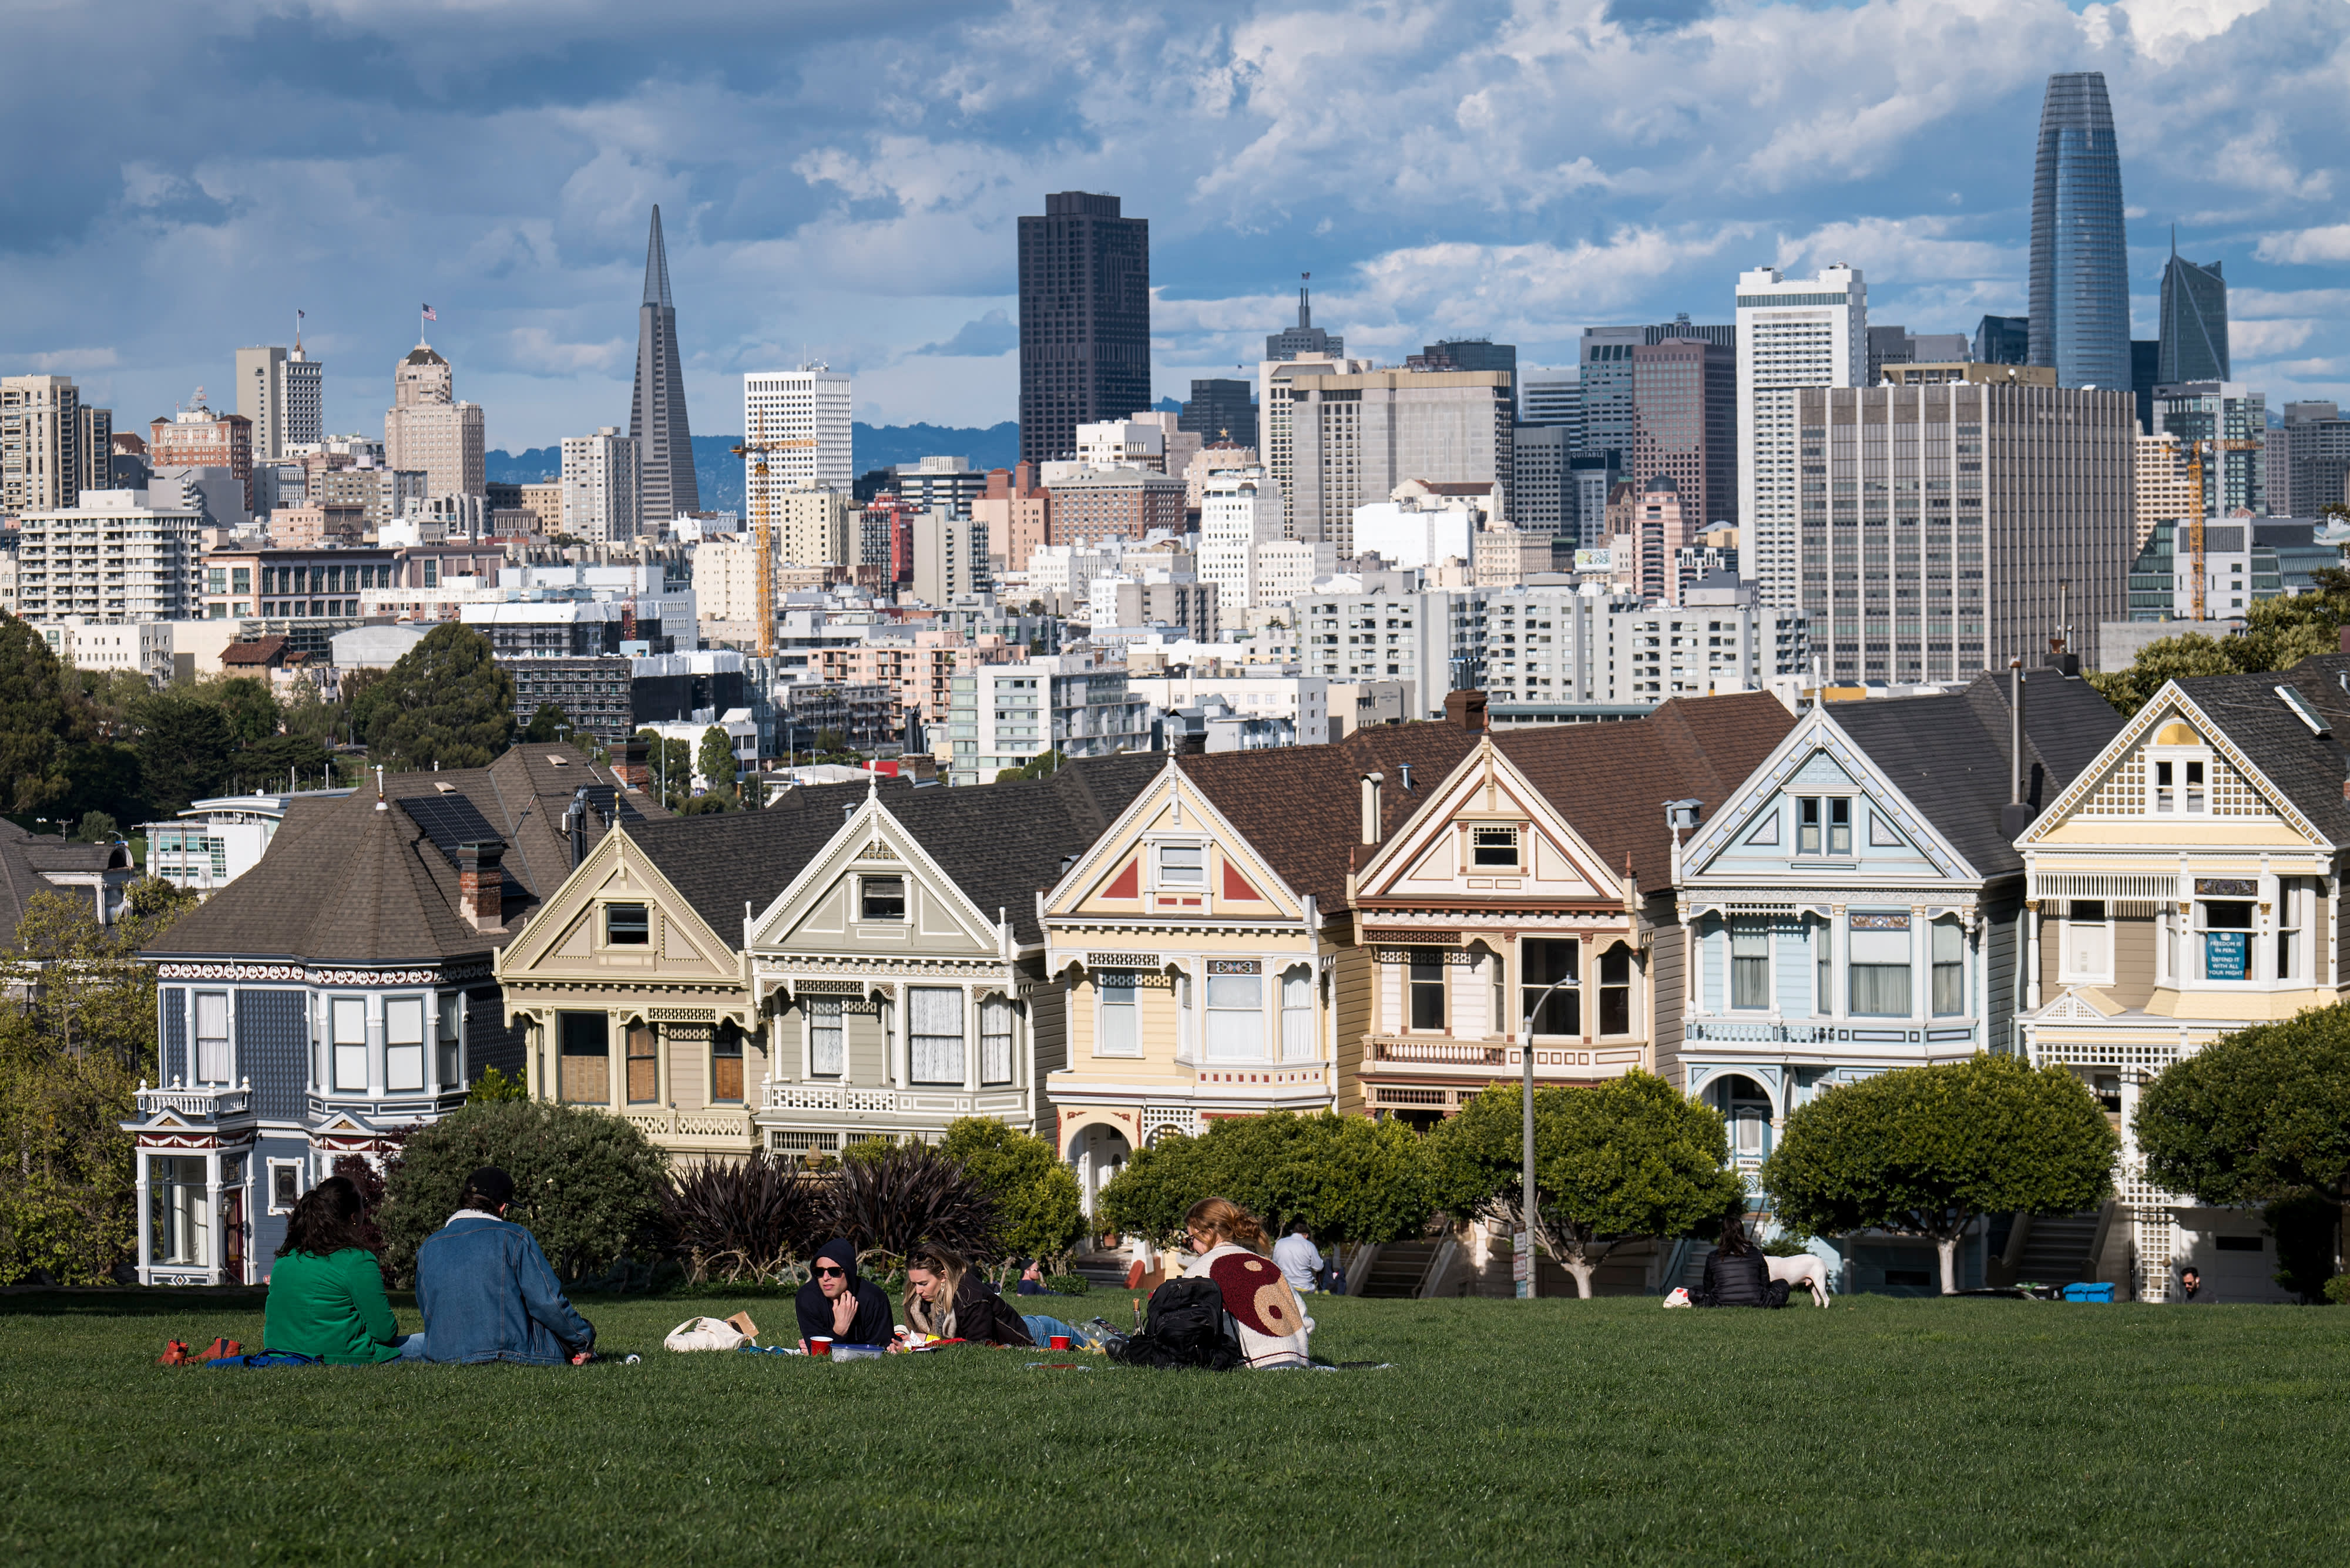 San Francisco Housing Has Cooled As Some Flee The City But Demand Is Still There Internewscast